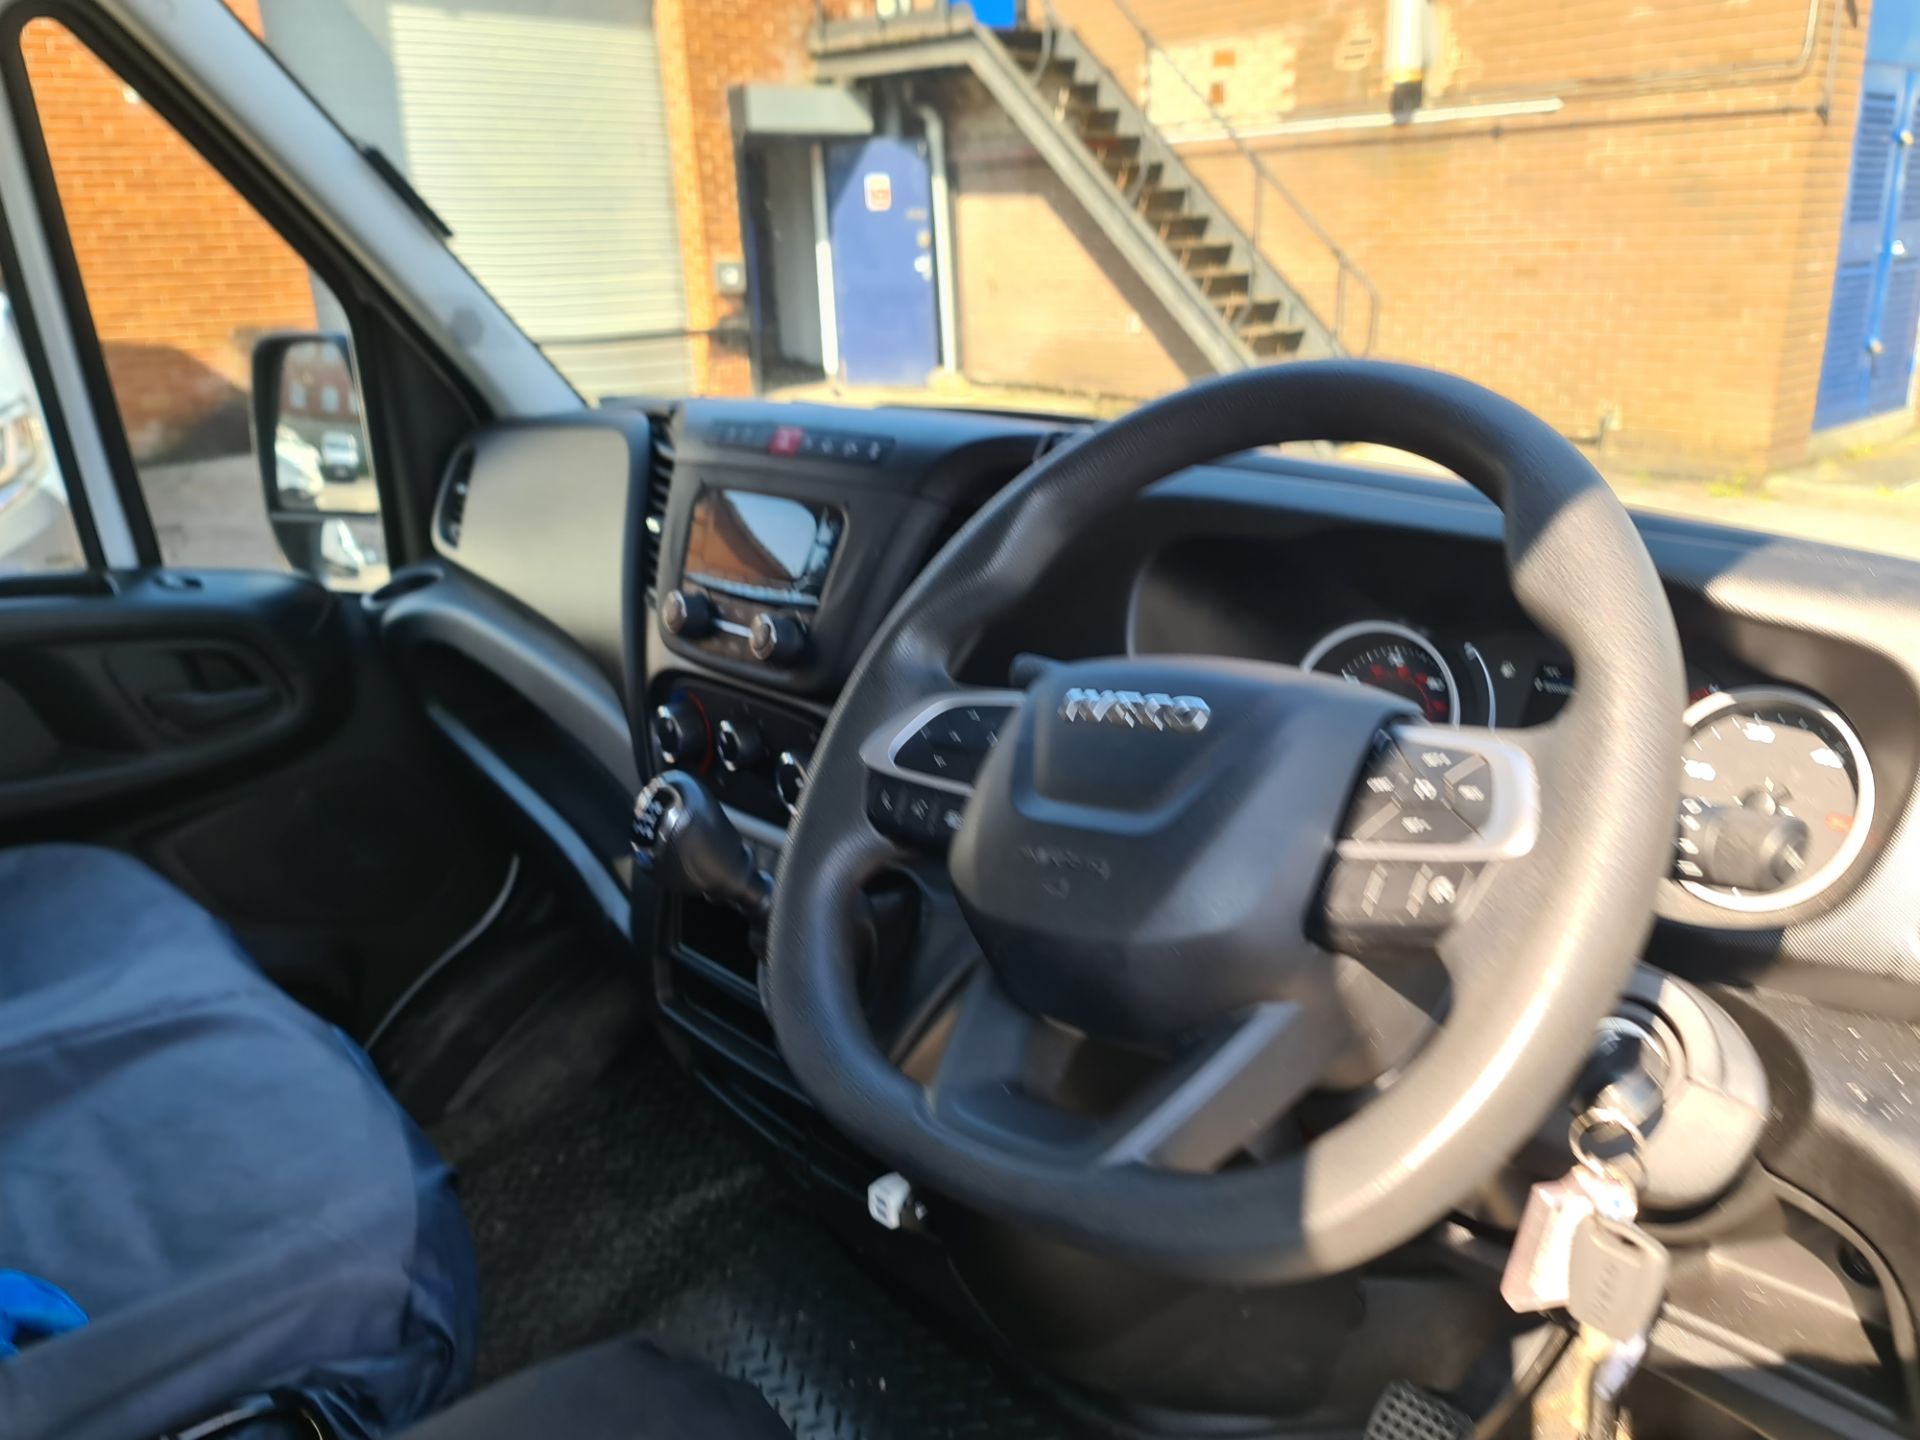 2020 Iveco Daily LWB high roof panel van - Image 9 of 21